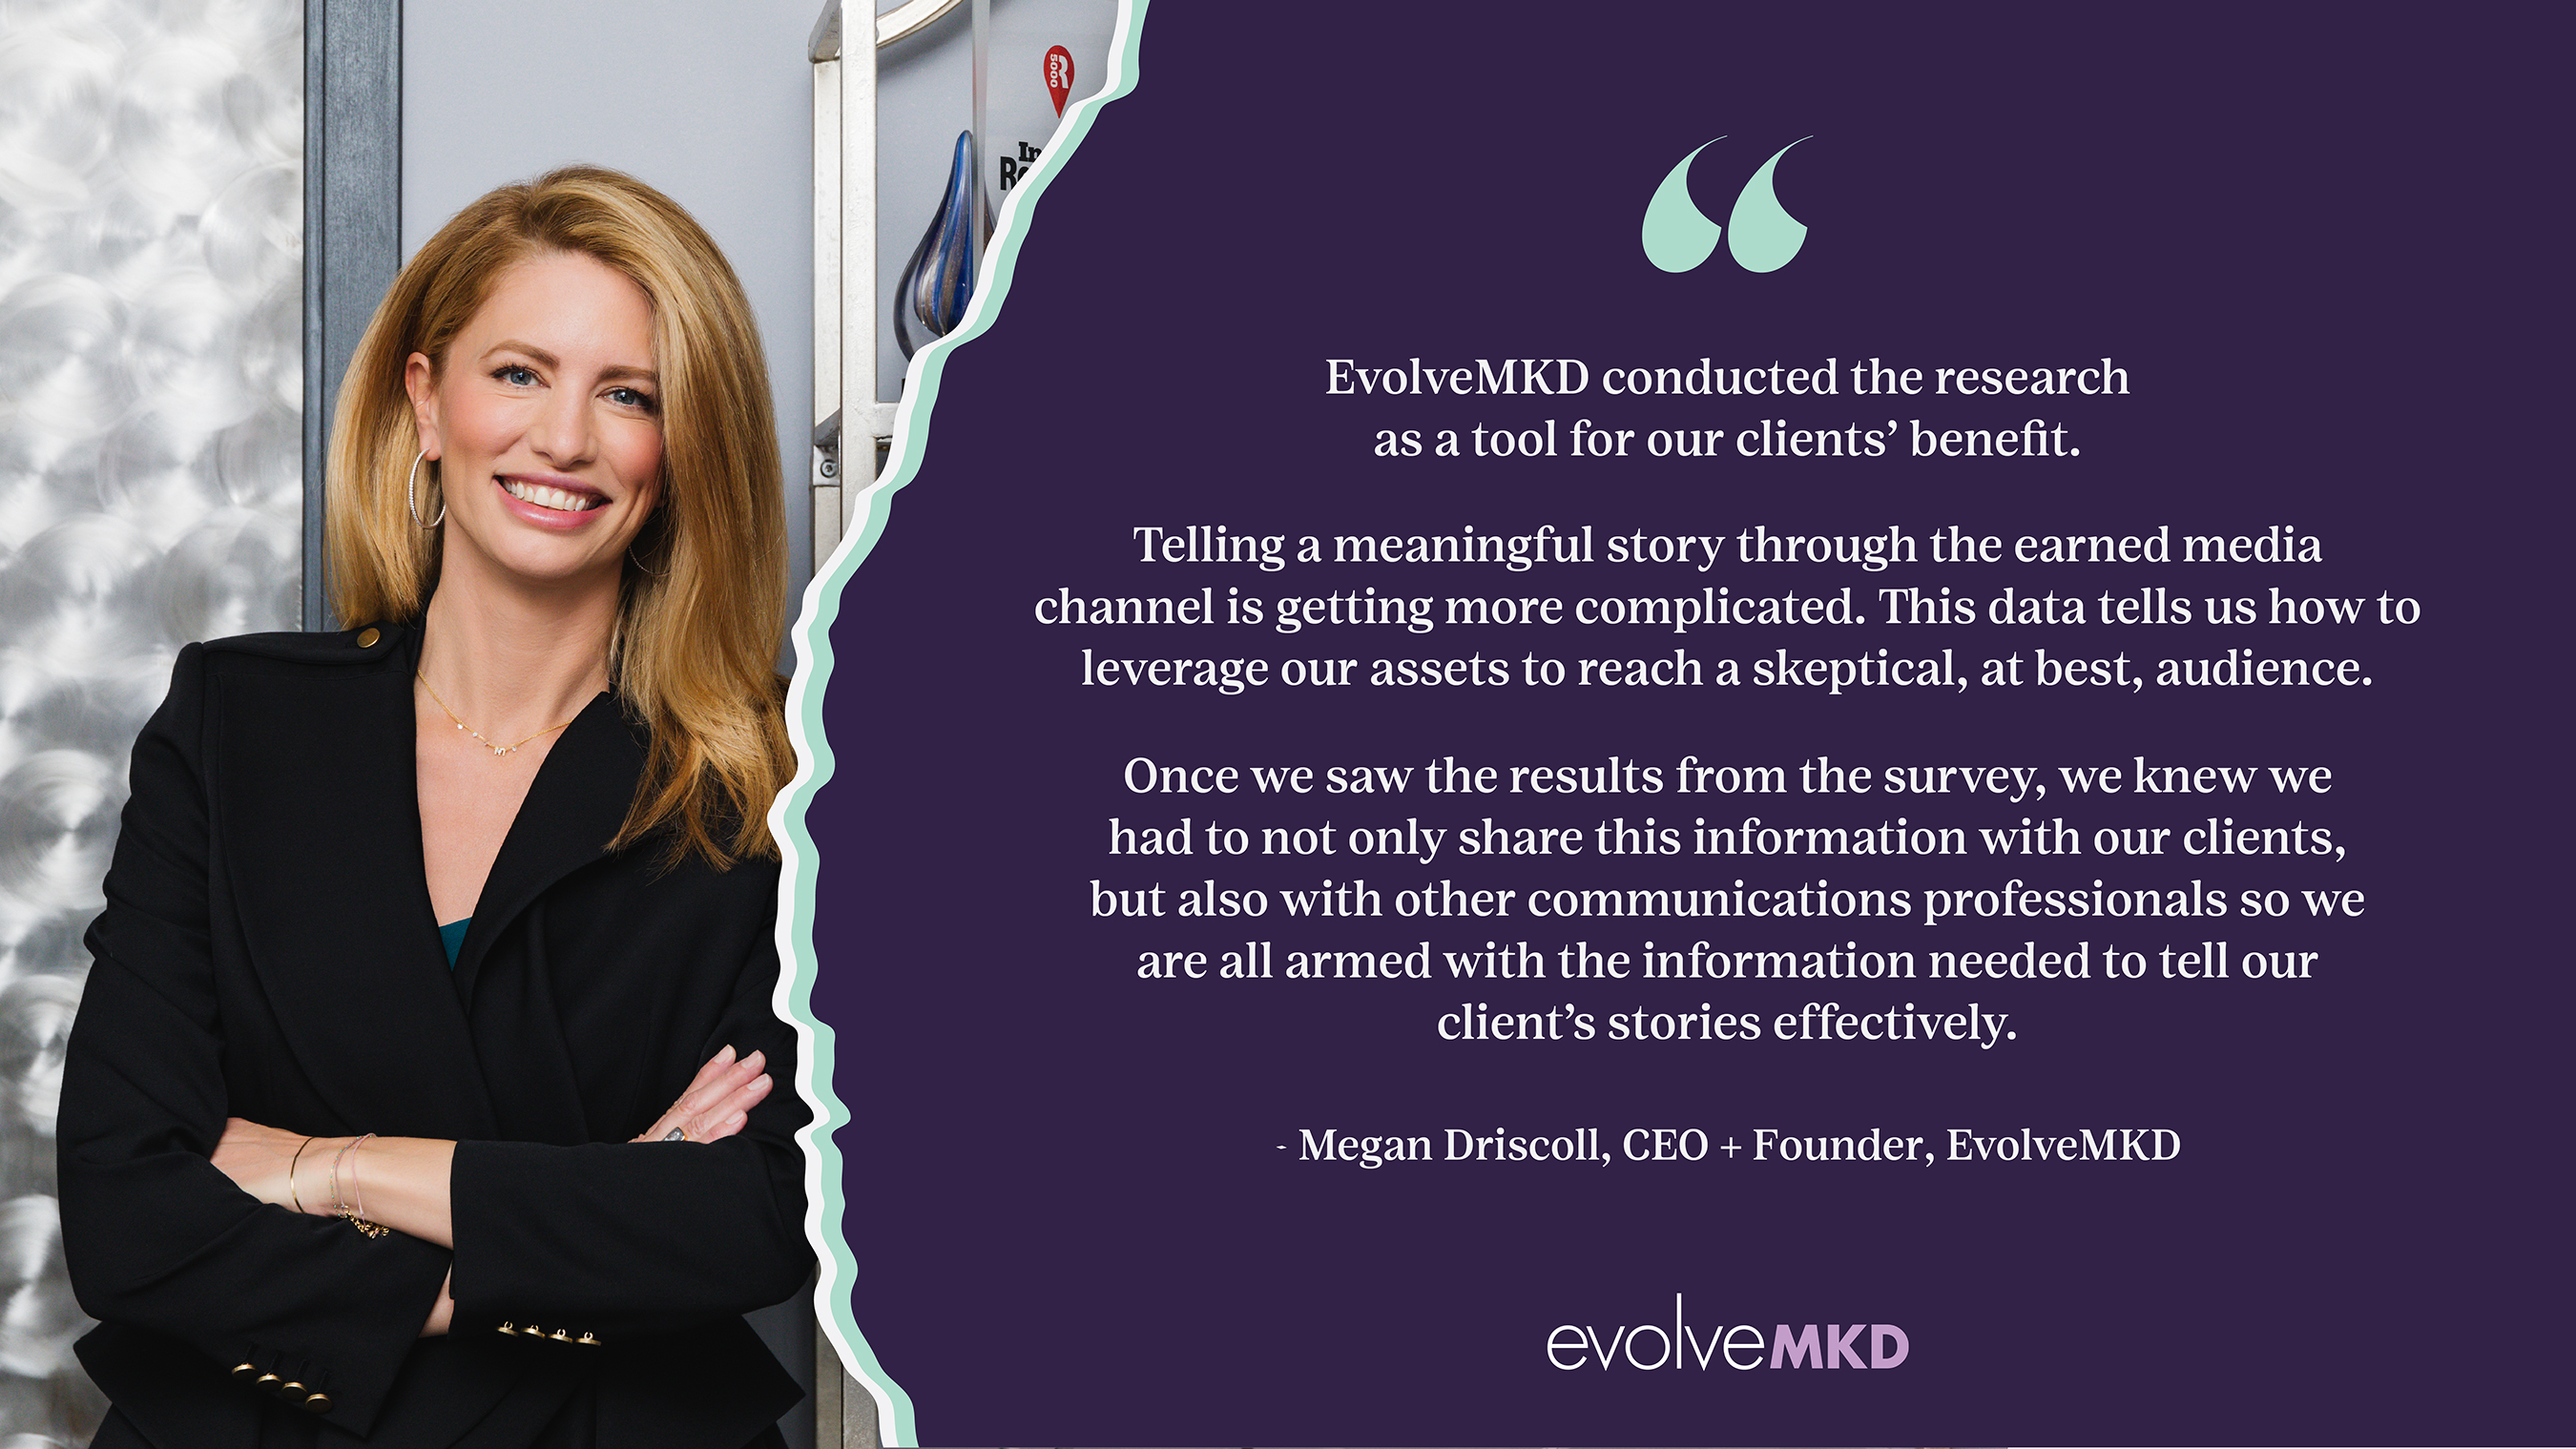 Megan Driscoll, CEO and Founder of EvolveMKD